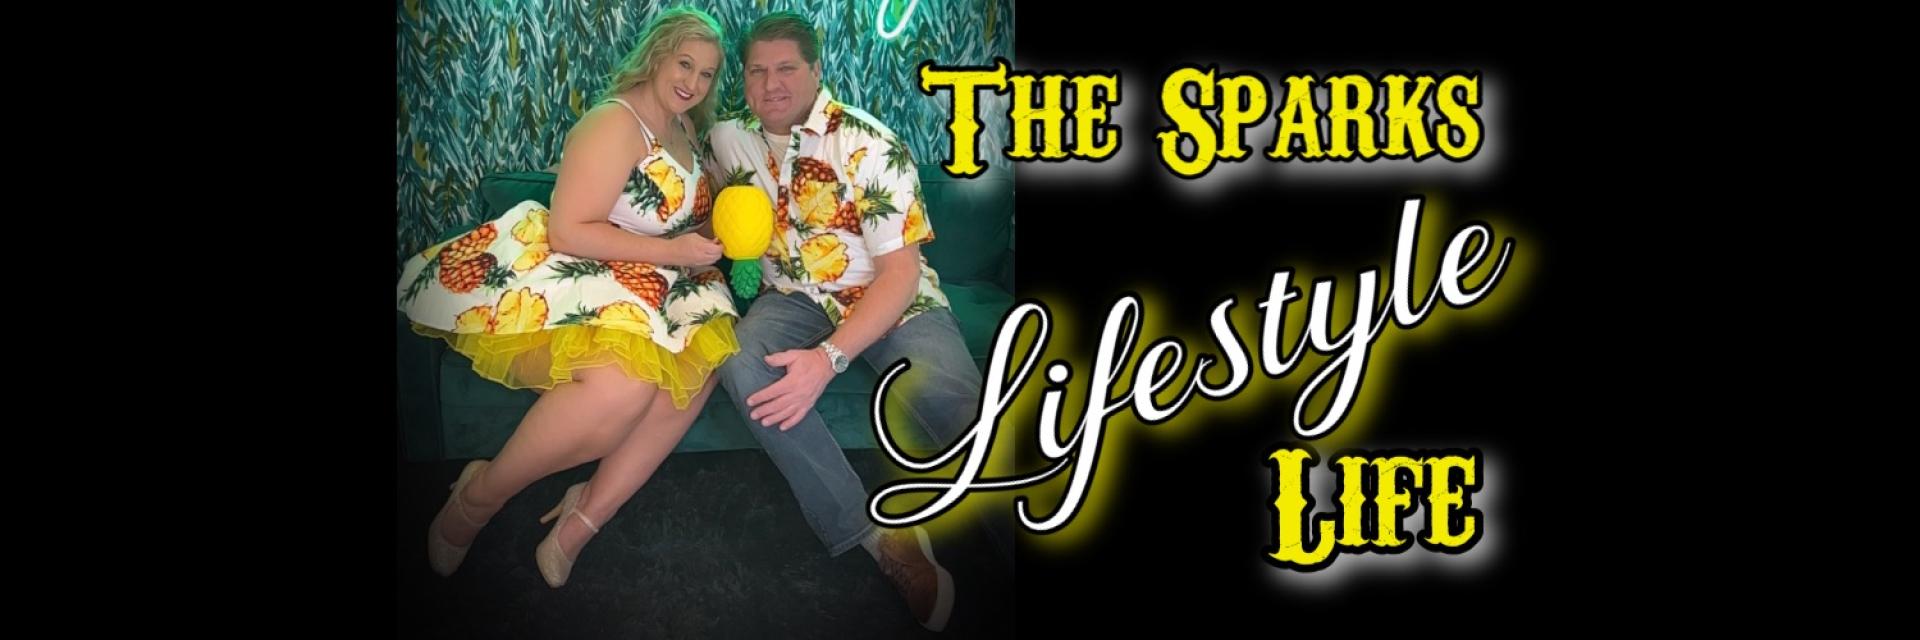 Swinger couple Ashlyn and Sonny Sparks of Lifestyle Life